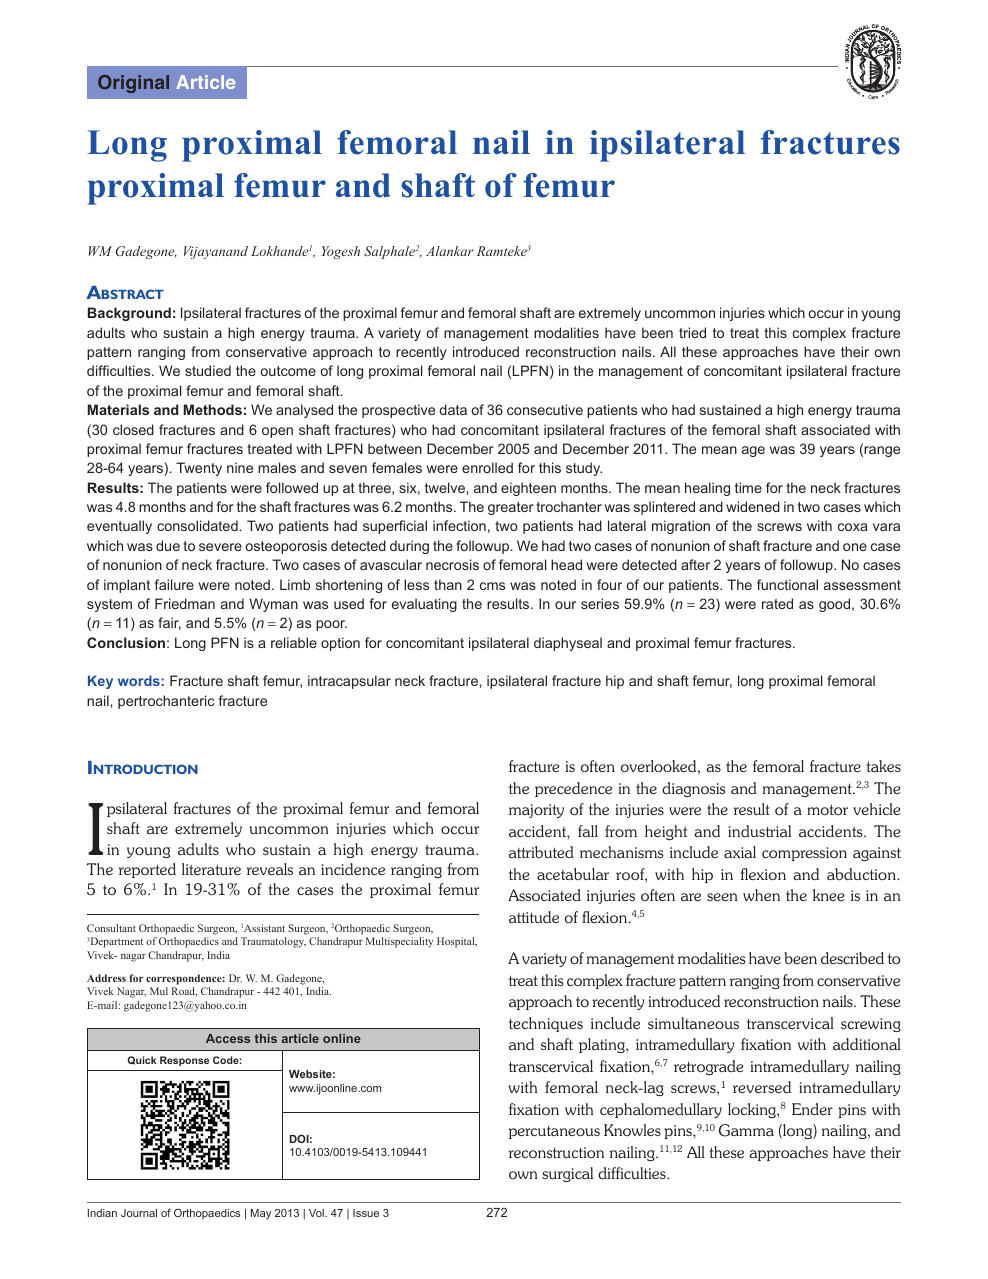 Long proximal femoral nail in ipsilateral fractures proximal femur and  shaft of femur – topic of research paper in Clinical medicine. Download  scholarly article PDF and read for free on CyberLeninka open